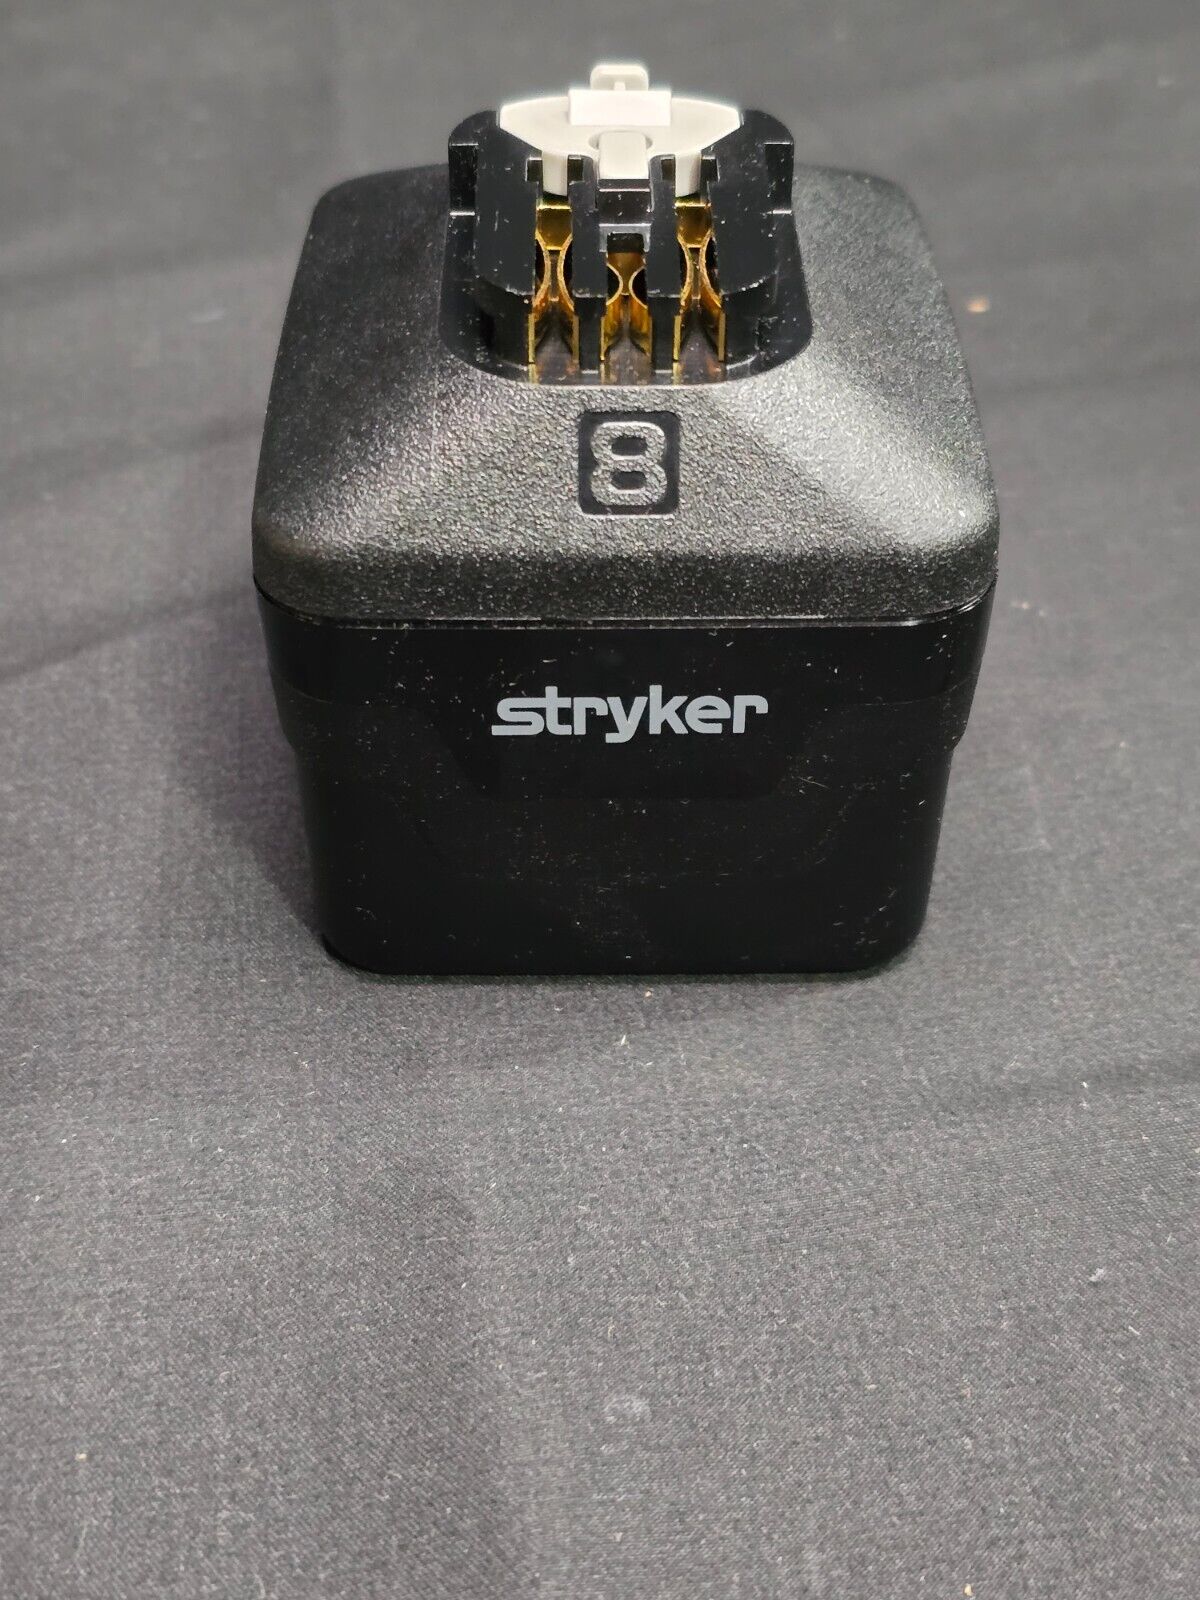 NEW Stryker 8215-000-000 System 8 Large Battery